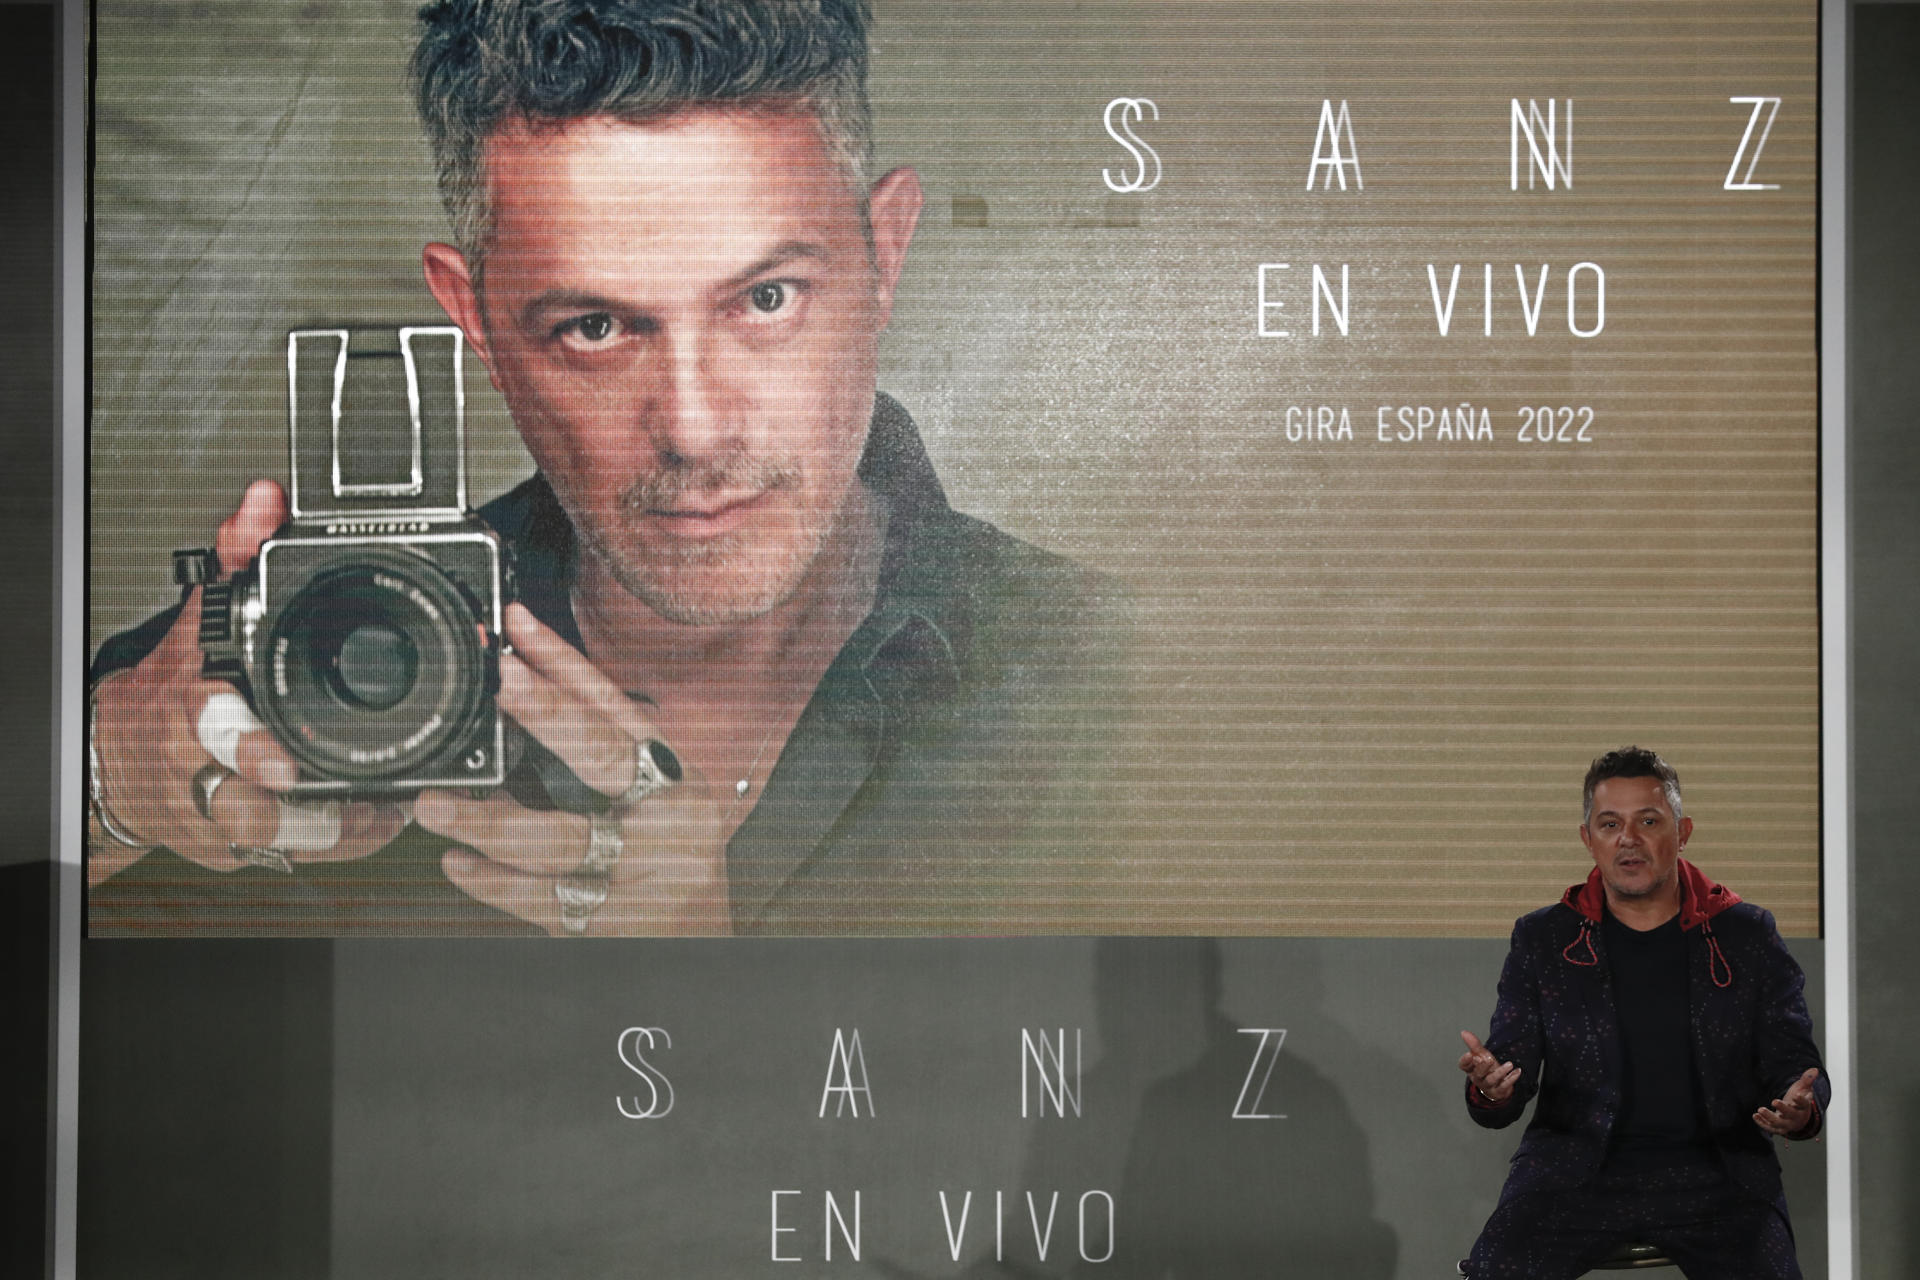 Alejandro Sanz and Rachel Valdes ended the relationship after three years